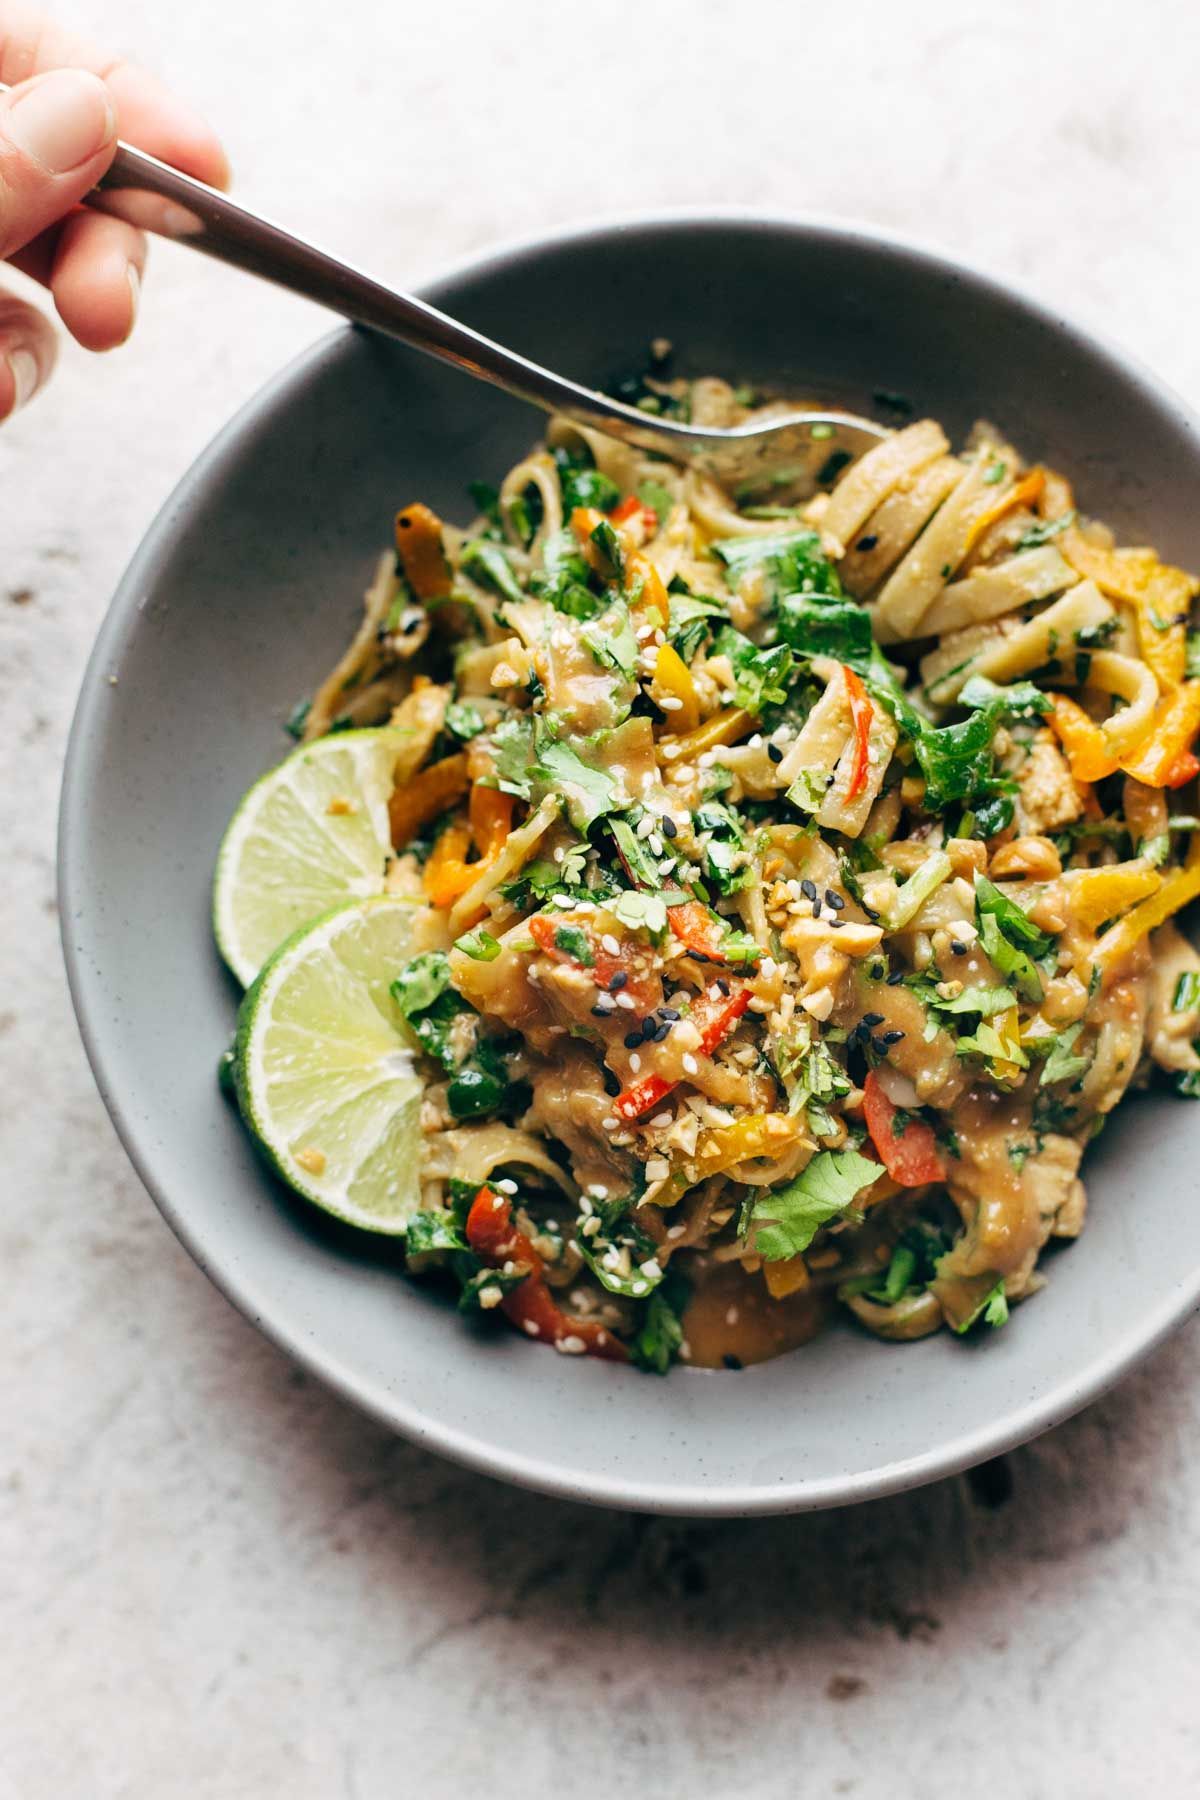 Thai Noodle Salad with Peanut Lime Dressing – veggies, chicken, brown rice noodles, and an easy homemade dressing. |